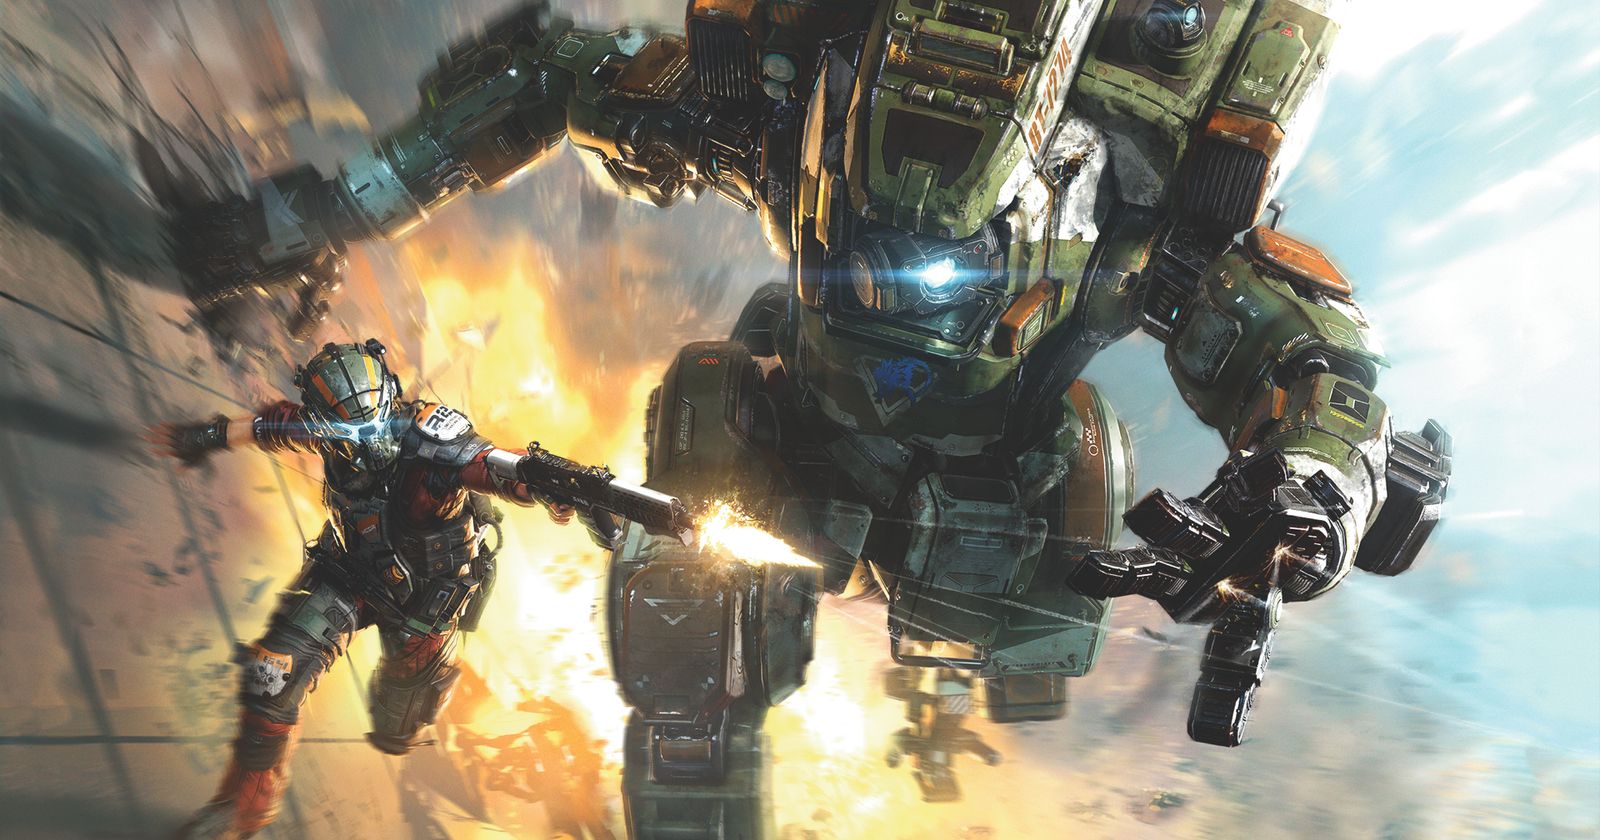 BREAKING: Respawn confirms they are investigating a security vulnerability  in Titanfall 2 - Inven Global